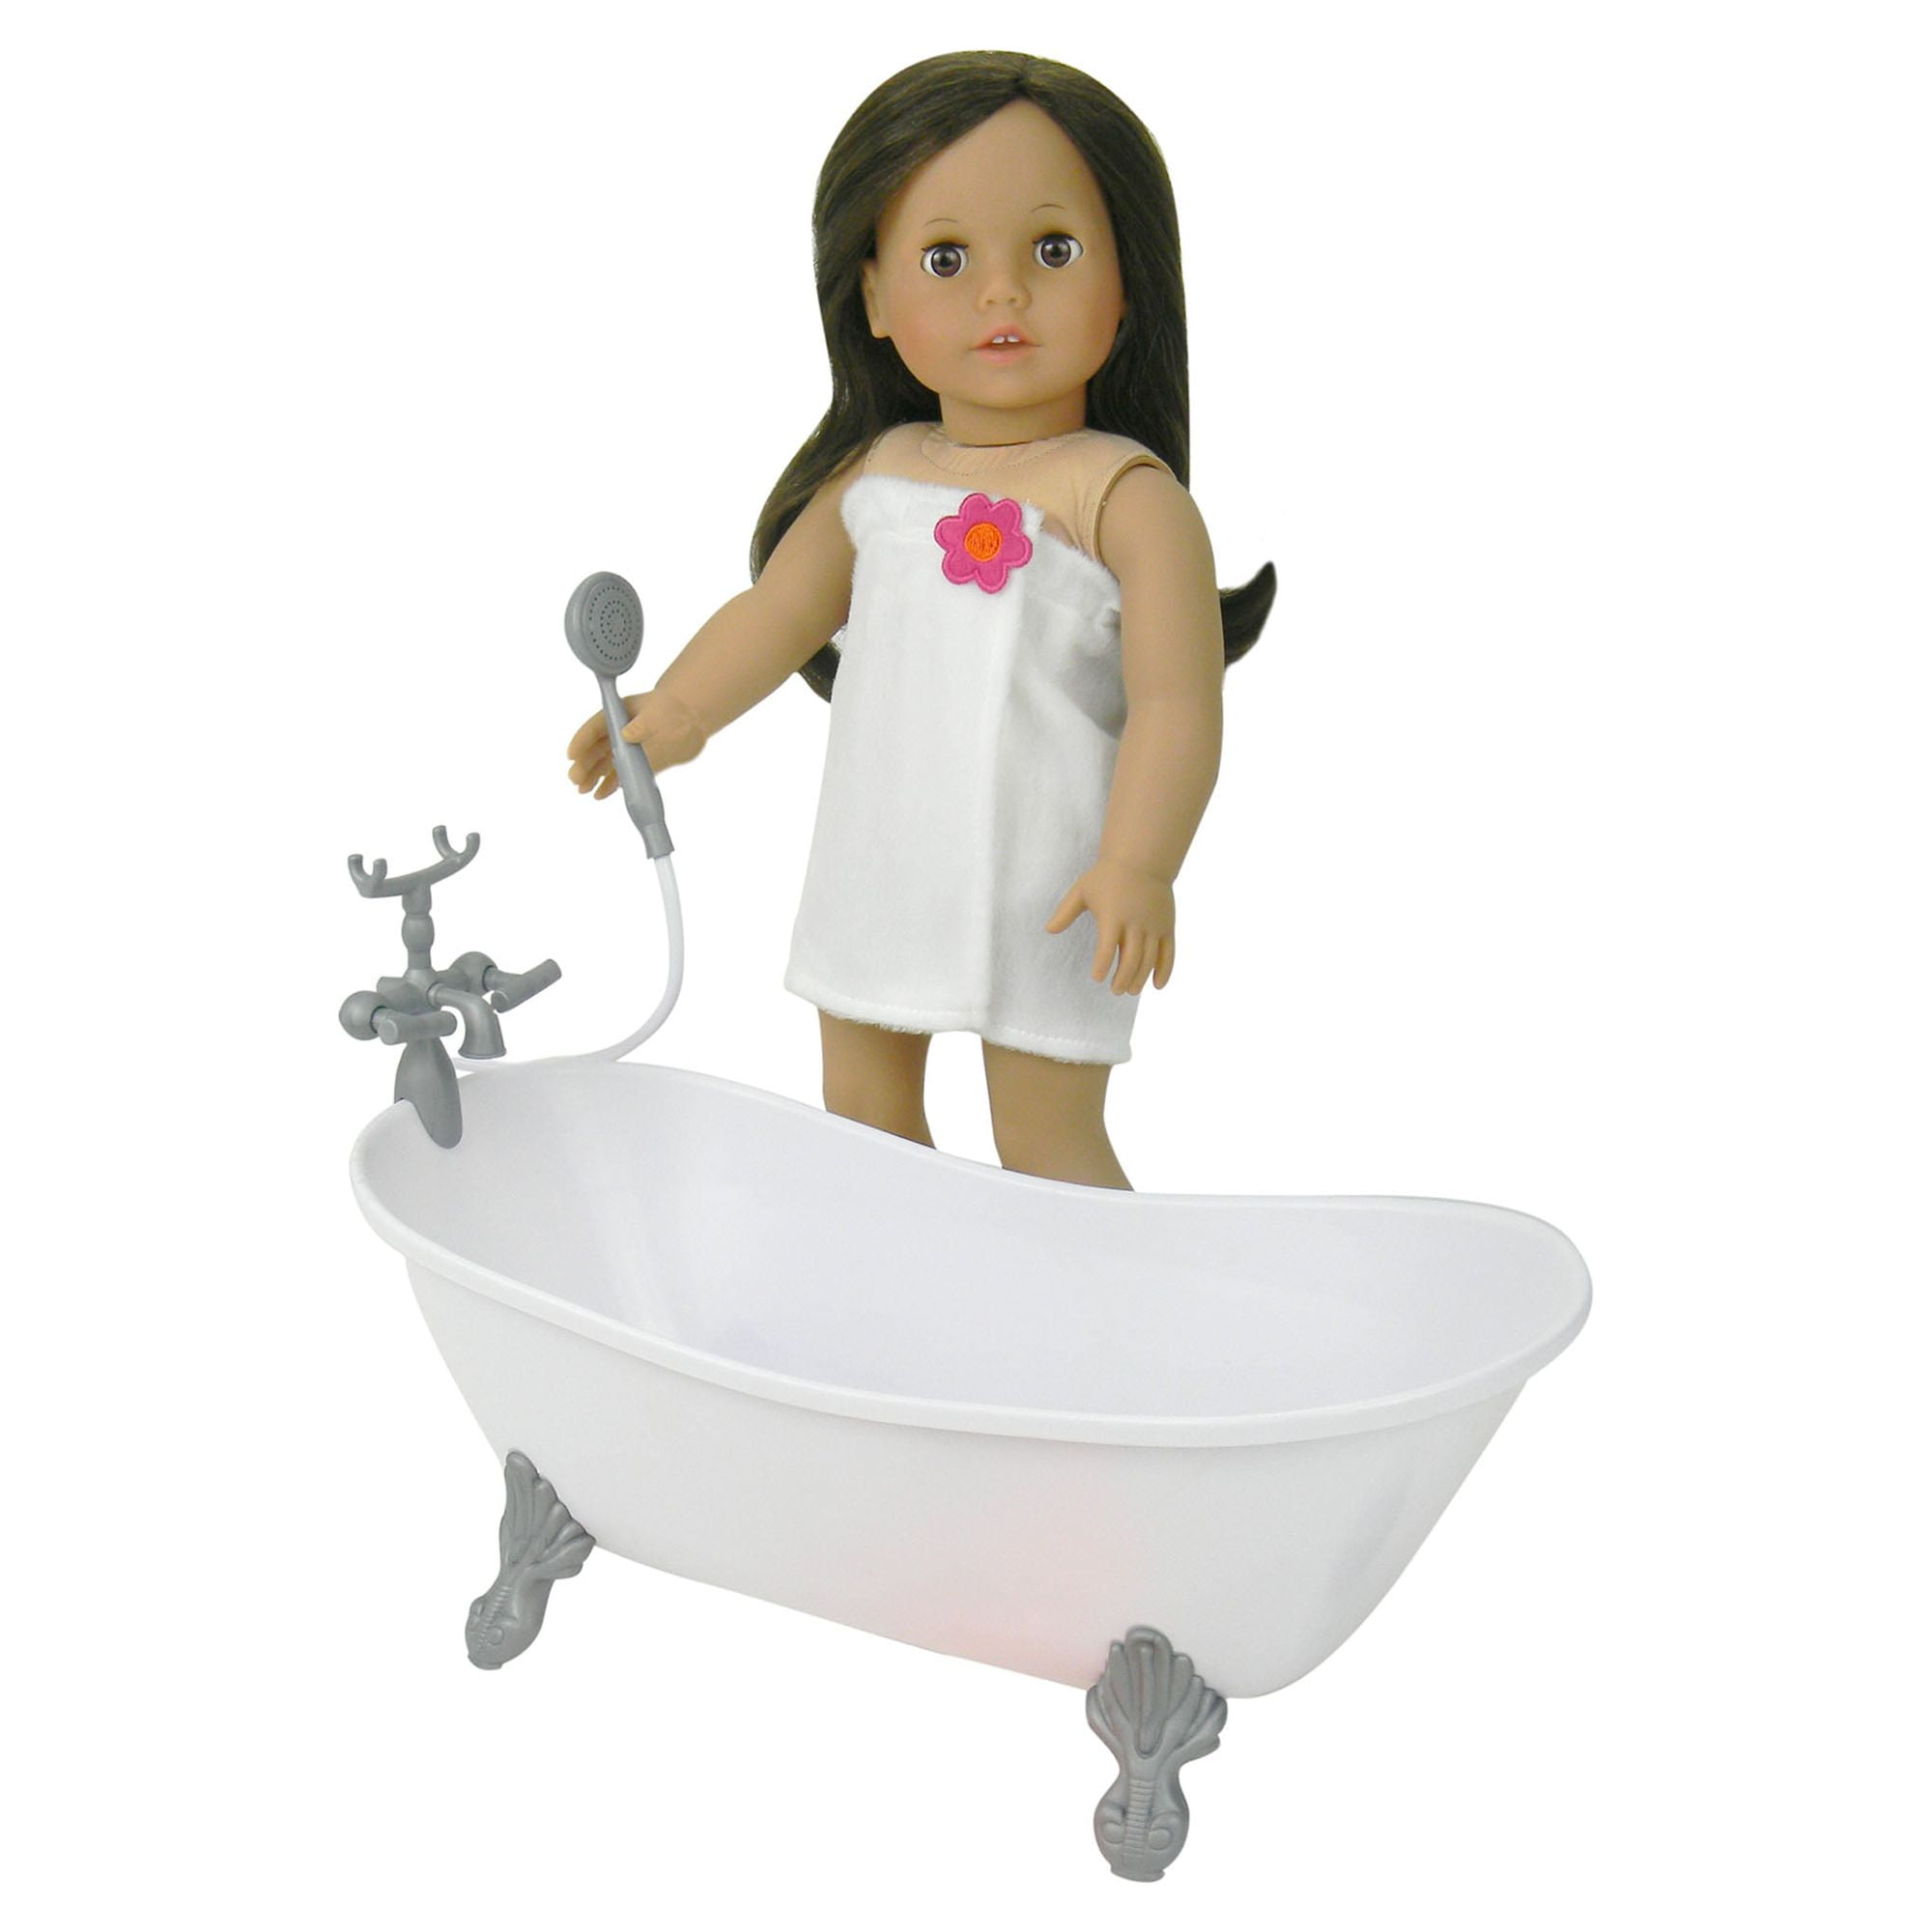 Sophia's Doll Bath Tub with Lining and Accessories & Reviews